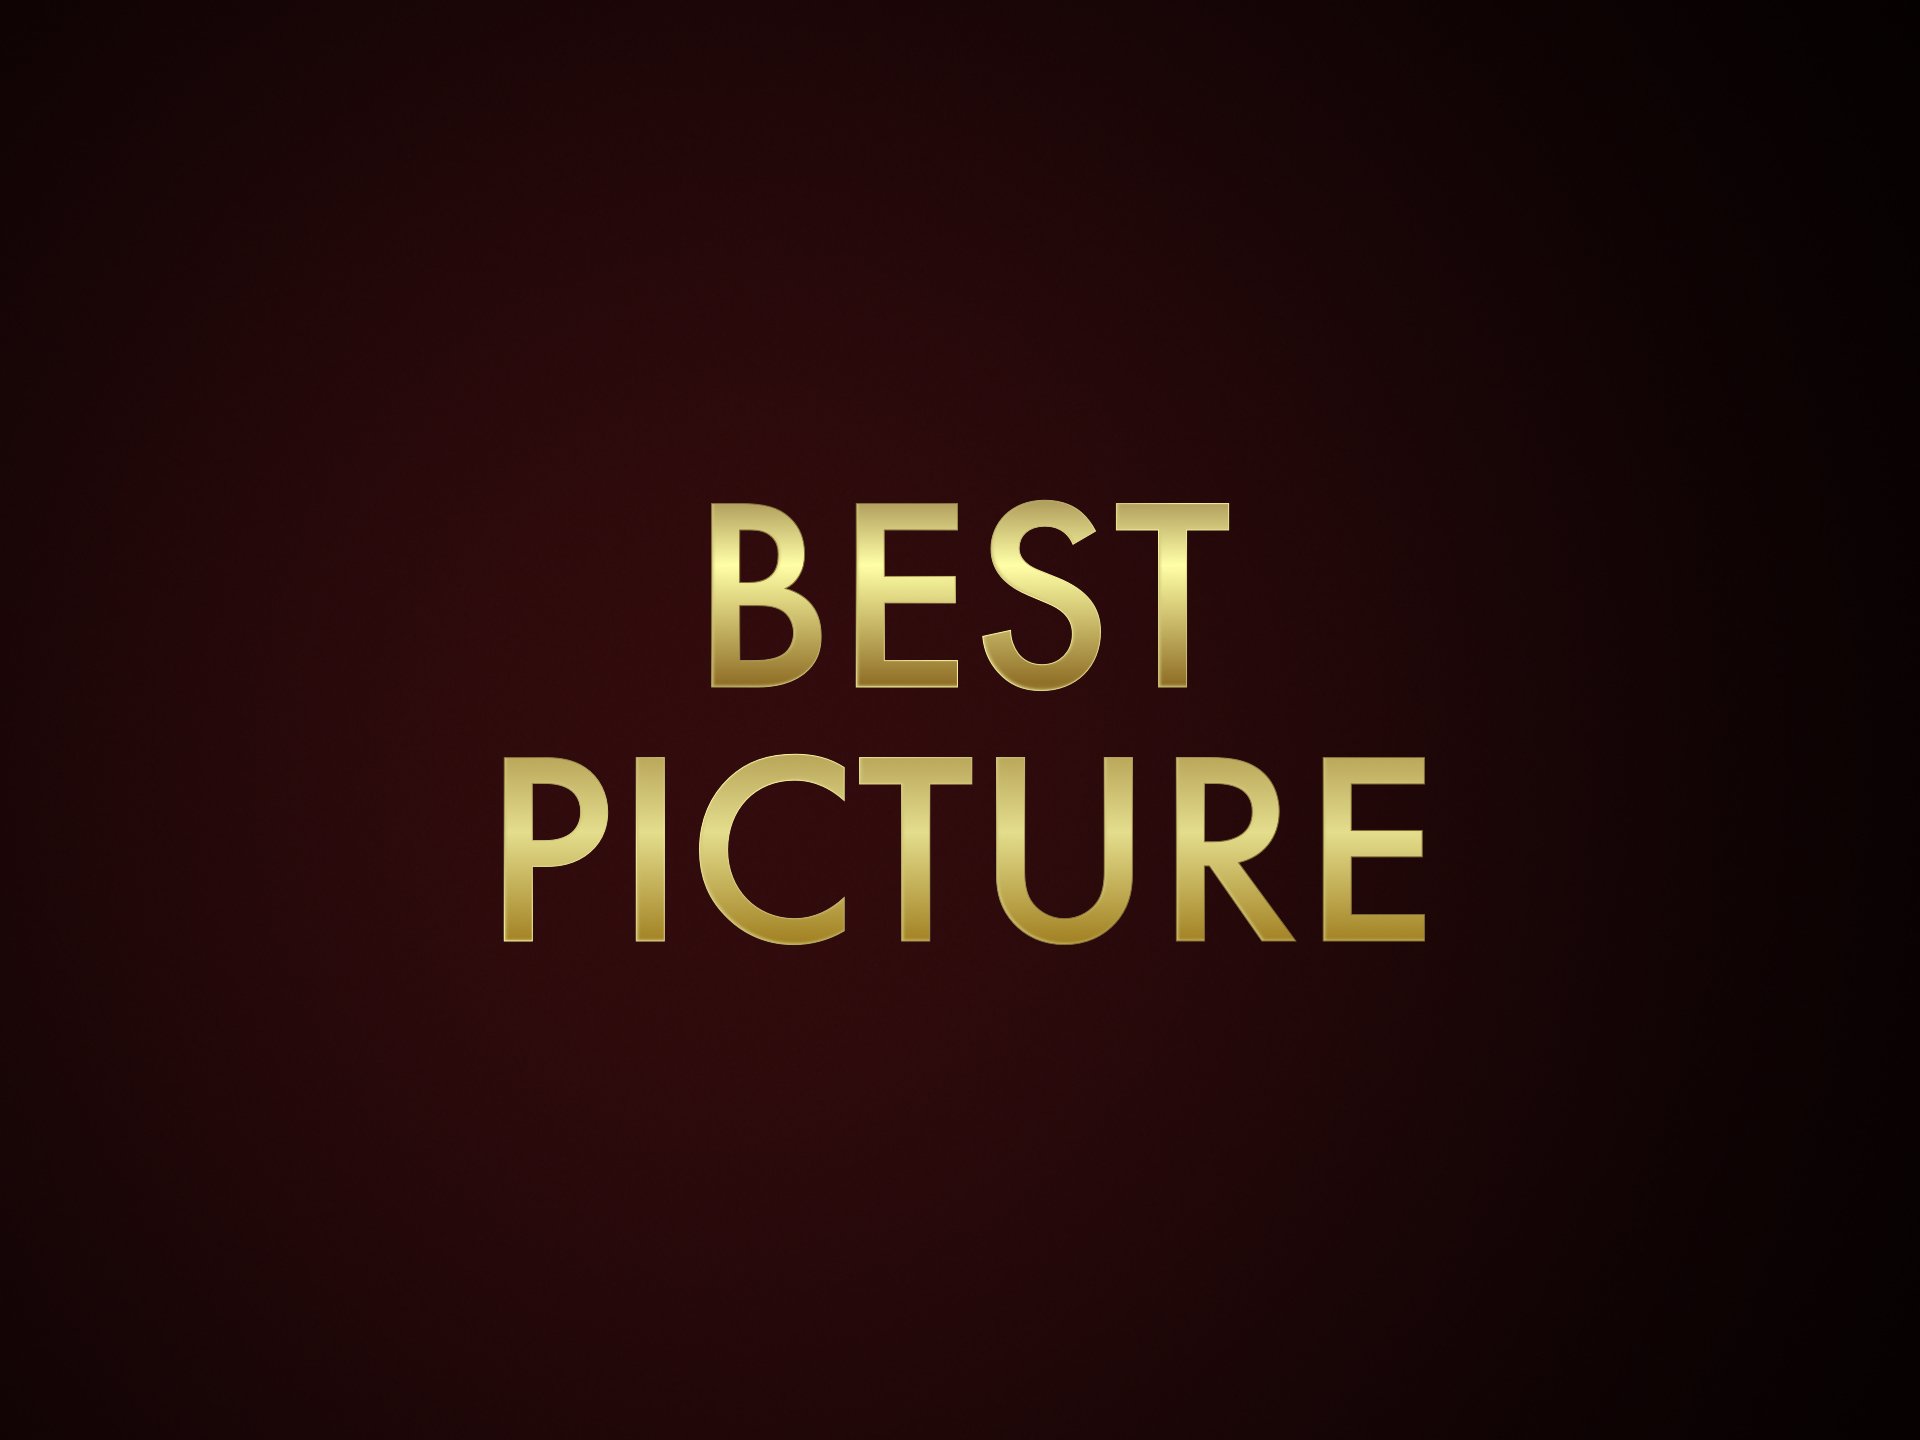 Best Picture Nominations Oscars News 92nd